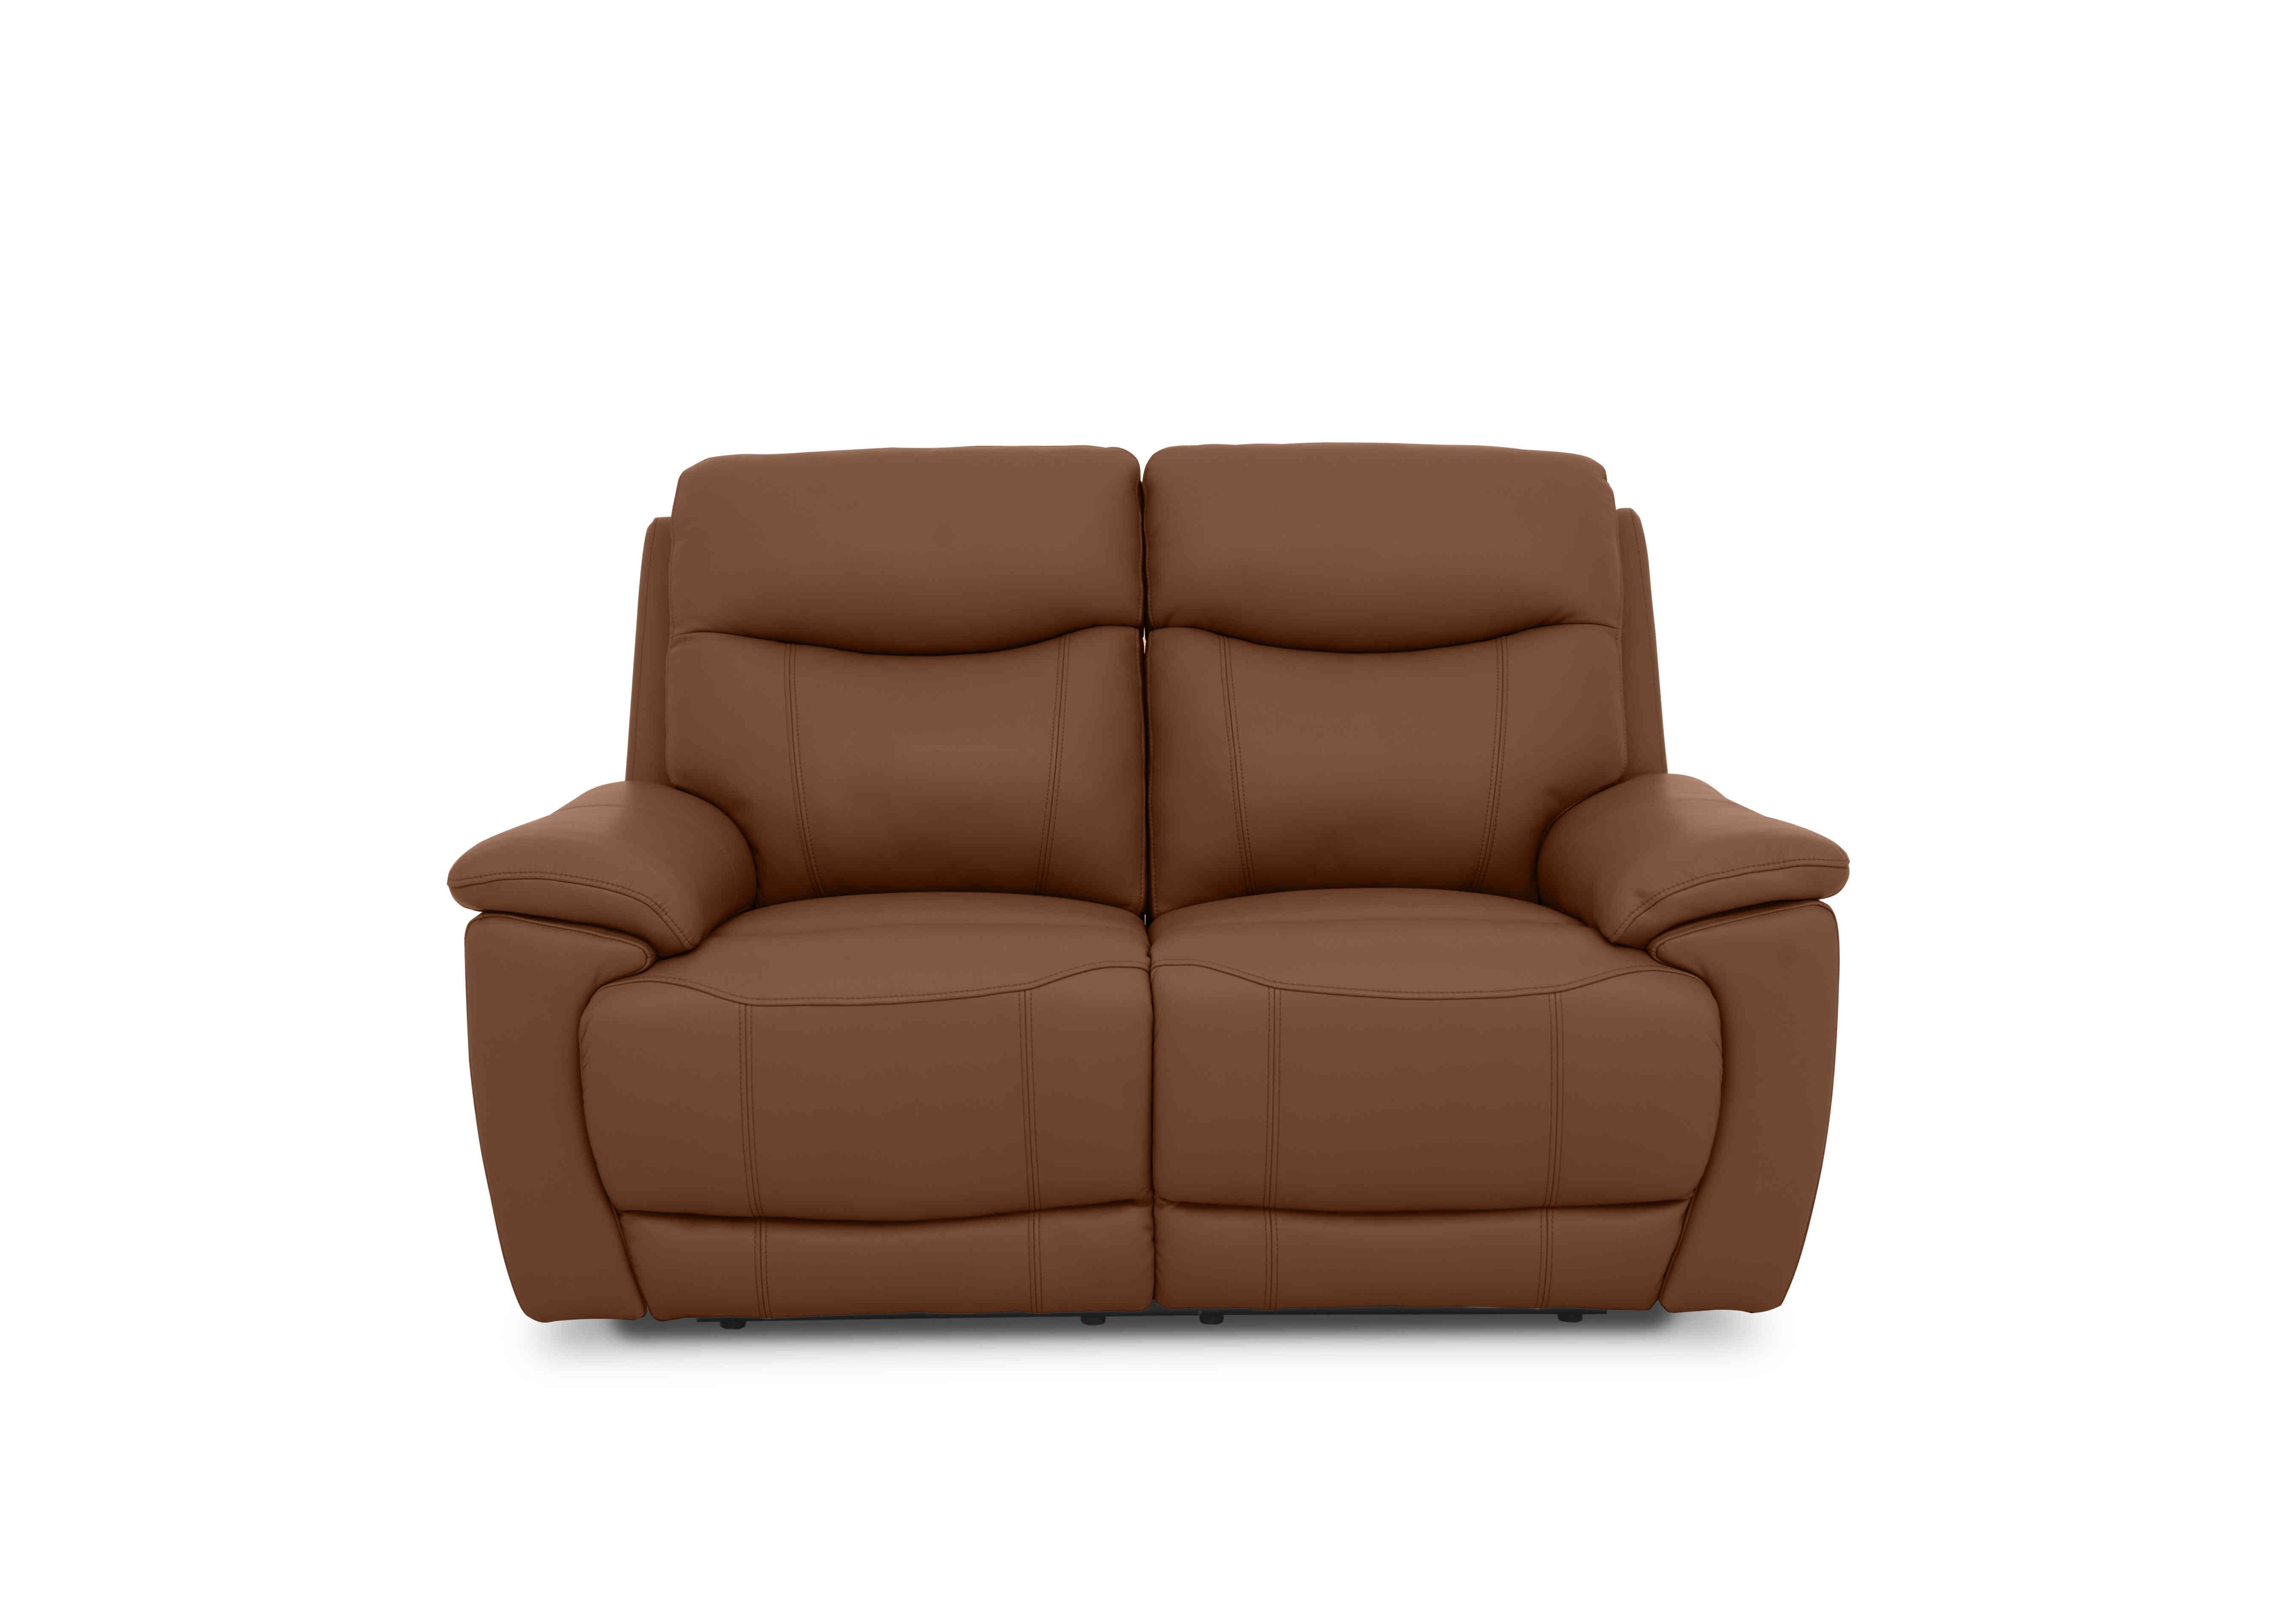 Sloane 2 Seater Leather Sofa in Cat-60/07 Butterscotch on Furniture Village